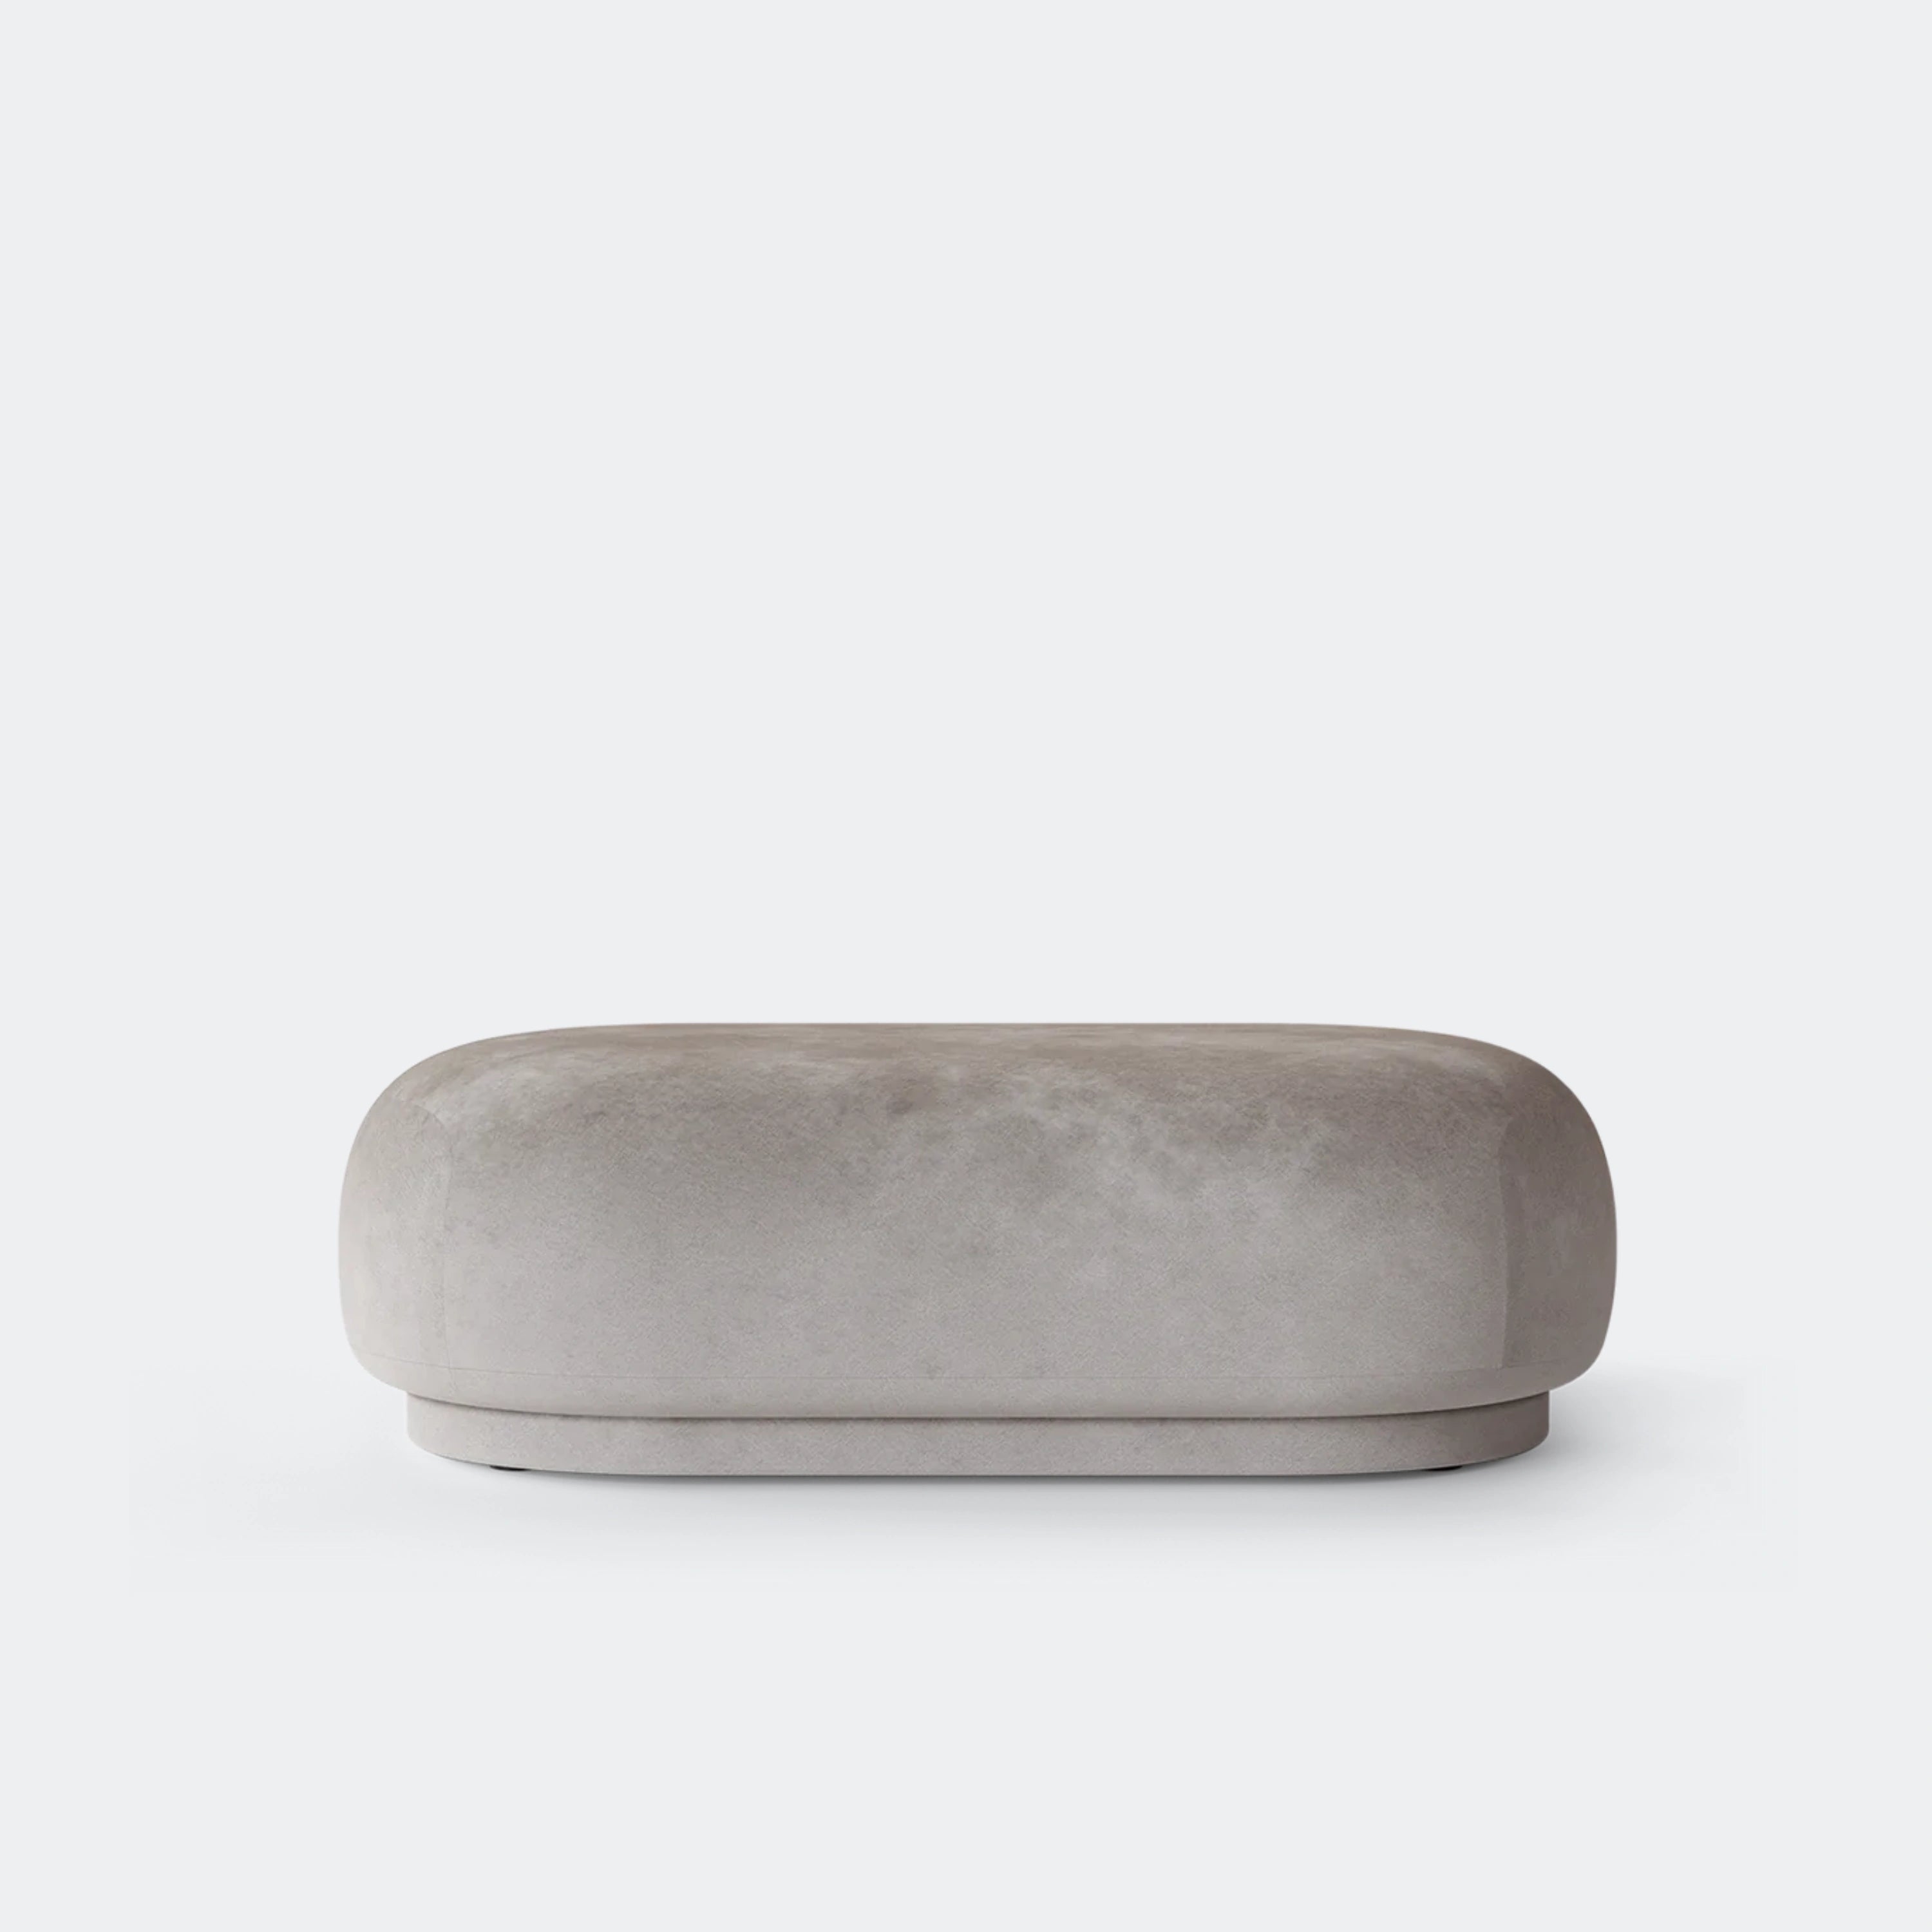 Ferm Living Rico Ottoman Made To Order (12-14 Weeks) Faded Velvet, Concrete - KANSO#Fabric_Faded Velvet, Concrete